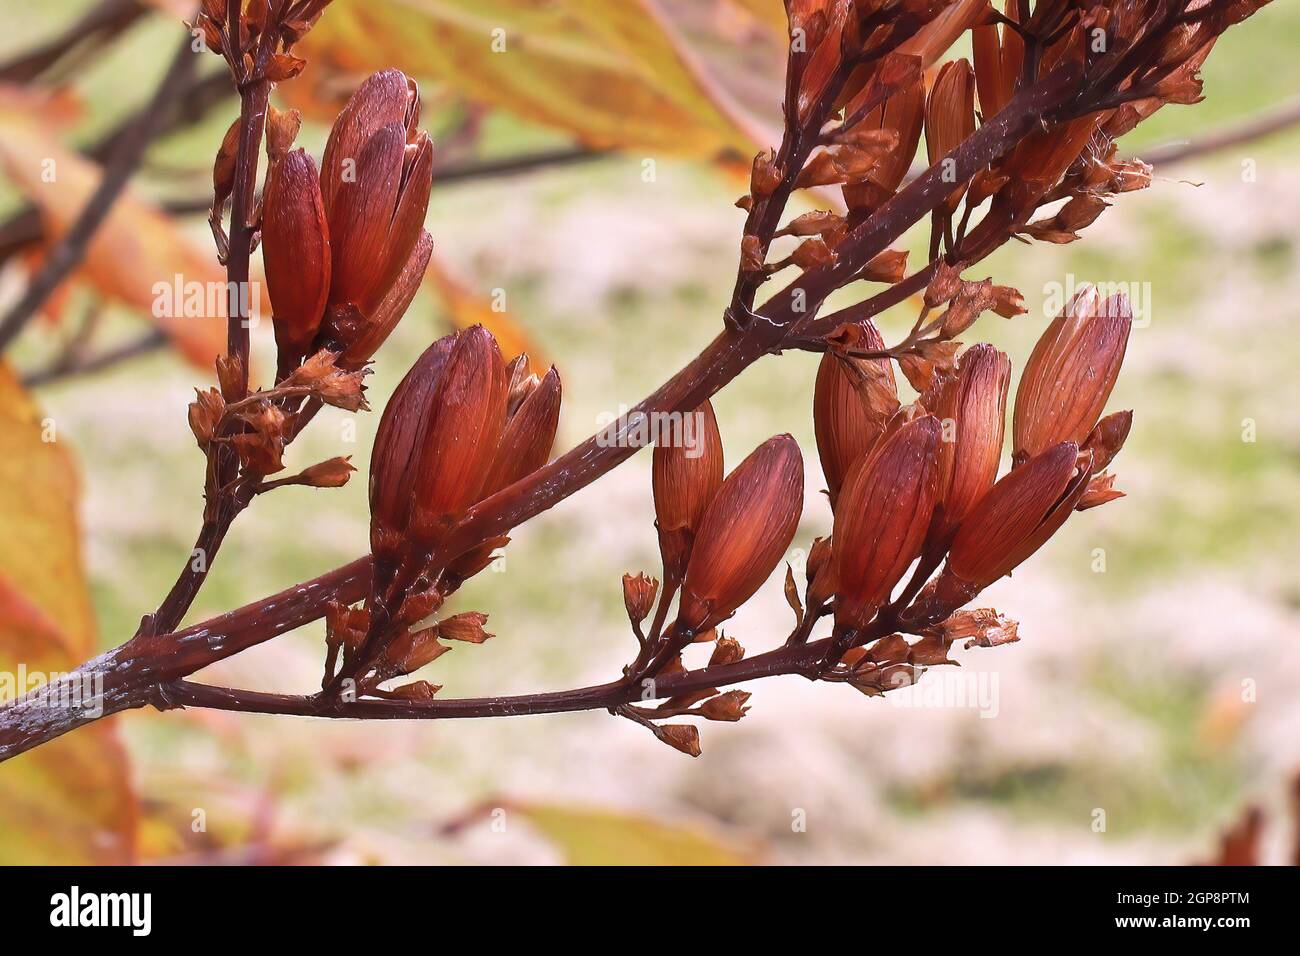 Redish orange lilac open seed pods in fall. Stock Photo